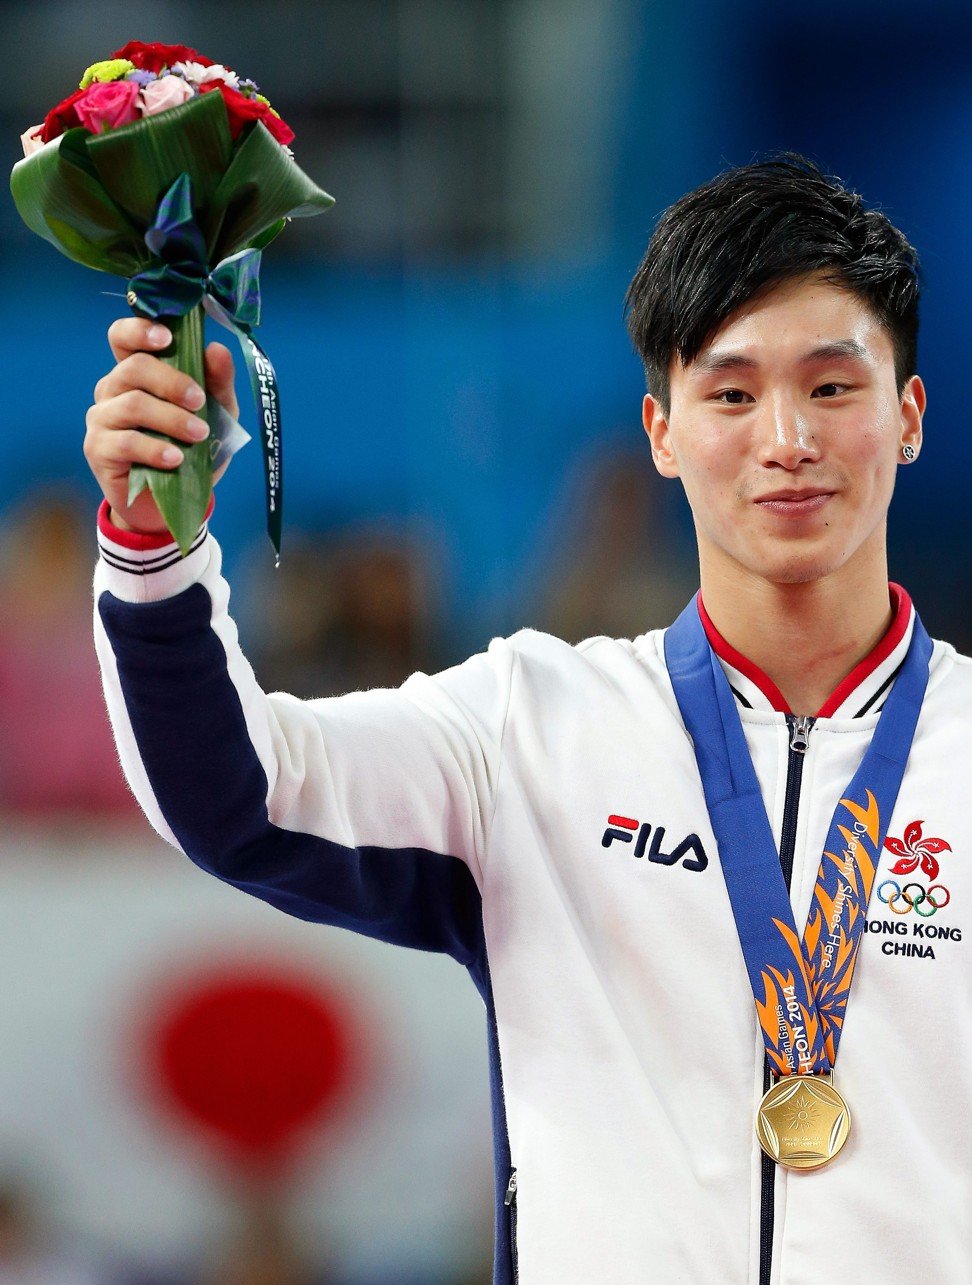 Stone Shek winning gold in the vault at the 2014 Incheon Asian Games. Photo: EPA